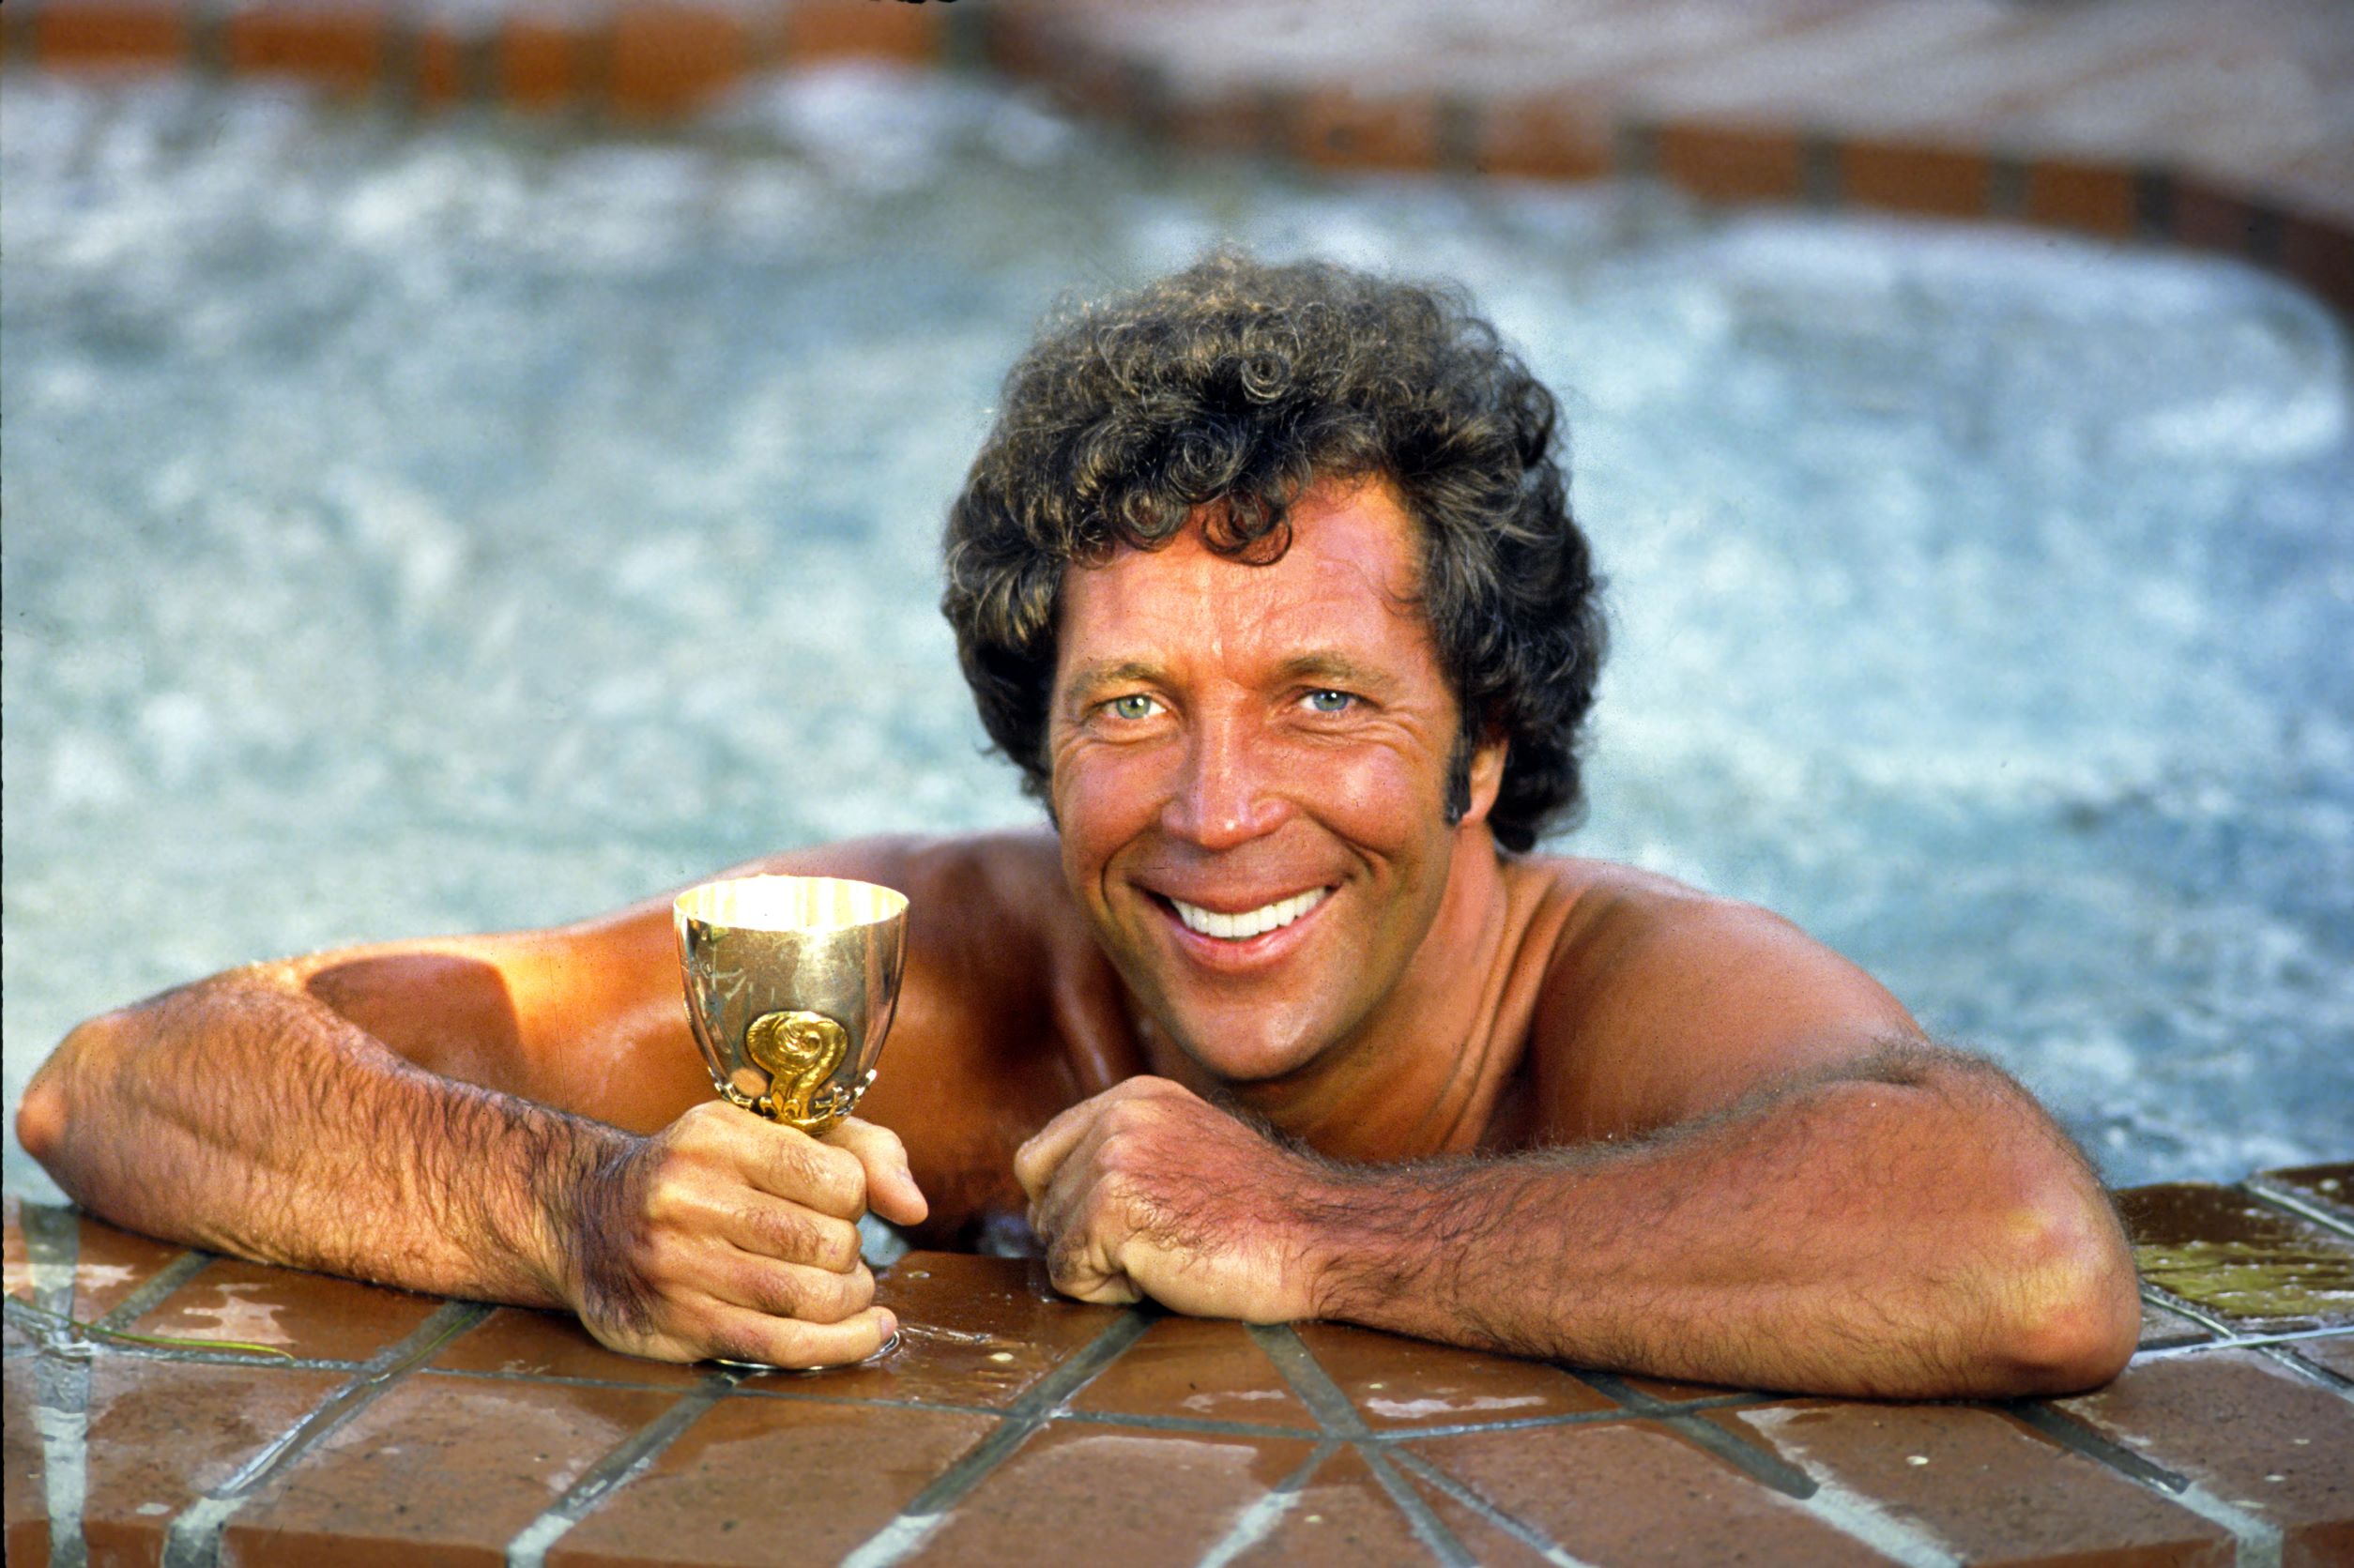 Tom Jones in a pool during his "She's a Lady" era